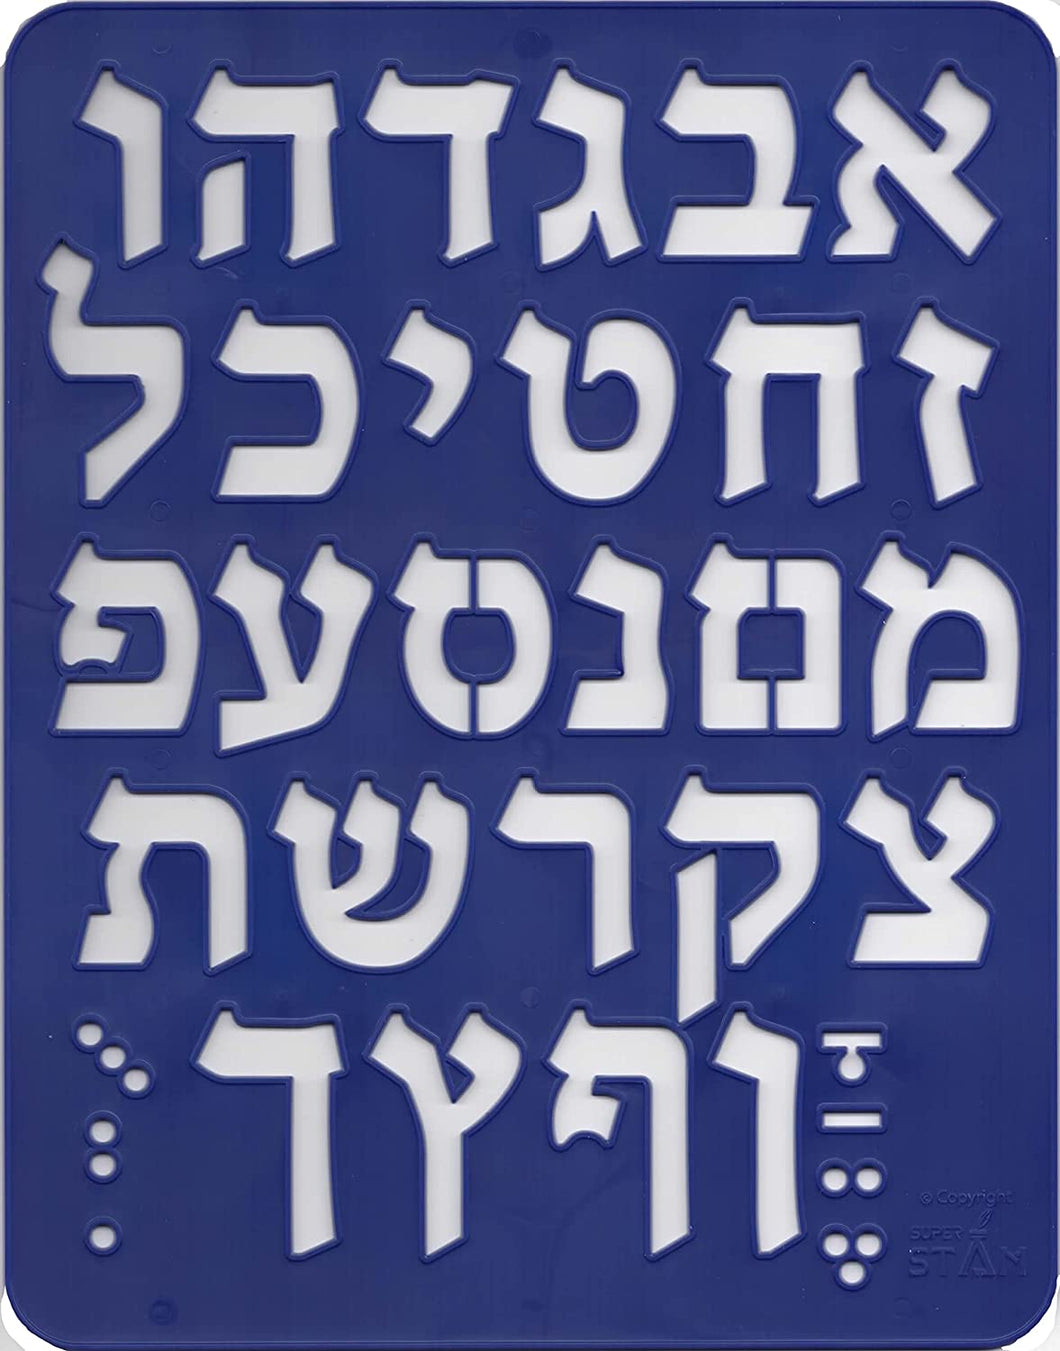 Hebrew ALEF Bet Hard Plastic Stencil Latest Modern Font (Large 28 x 20 cm) sold in unit of 6 pieces